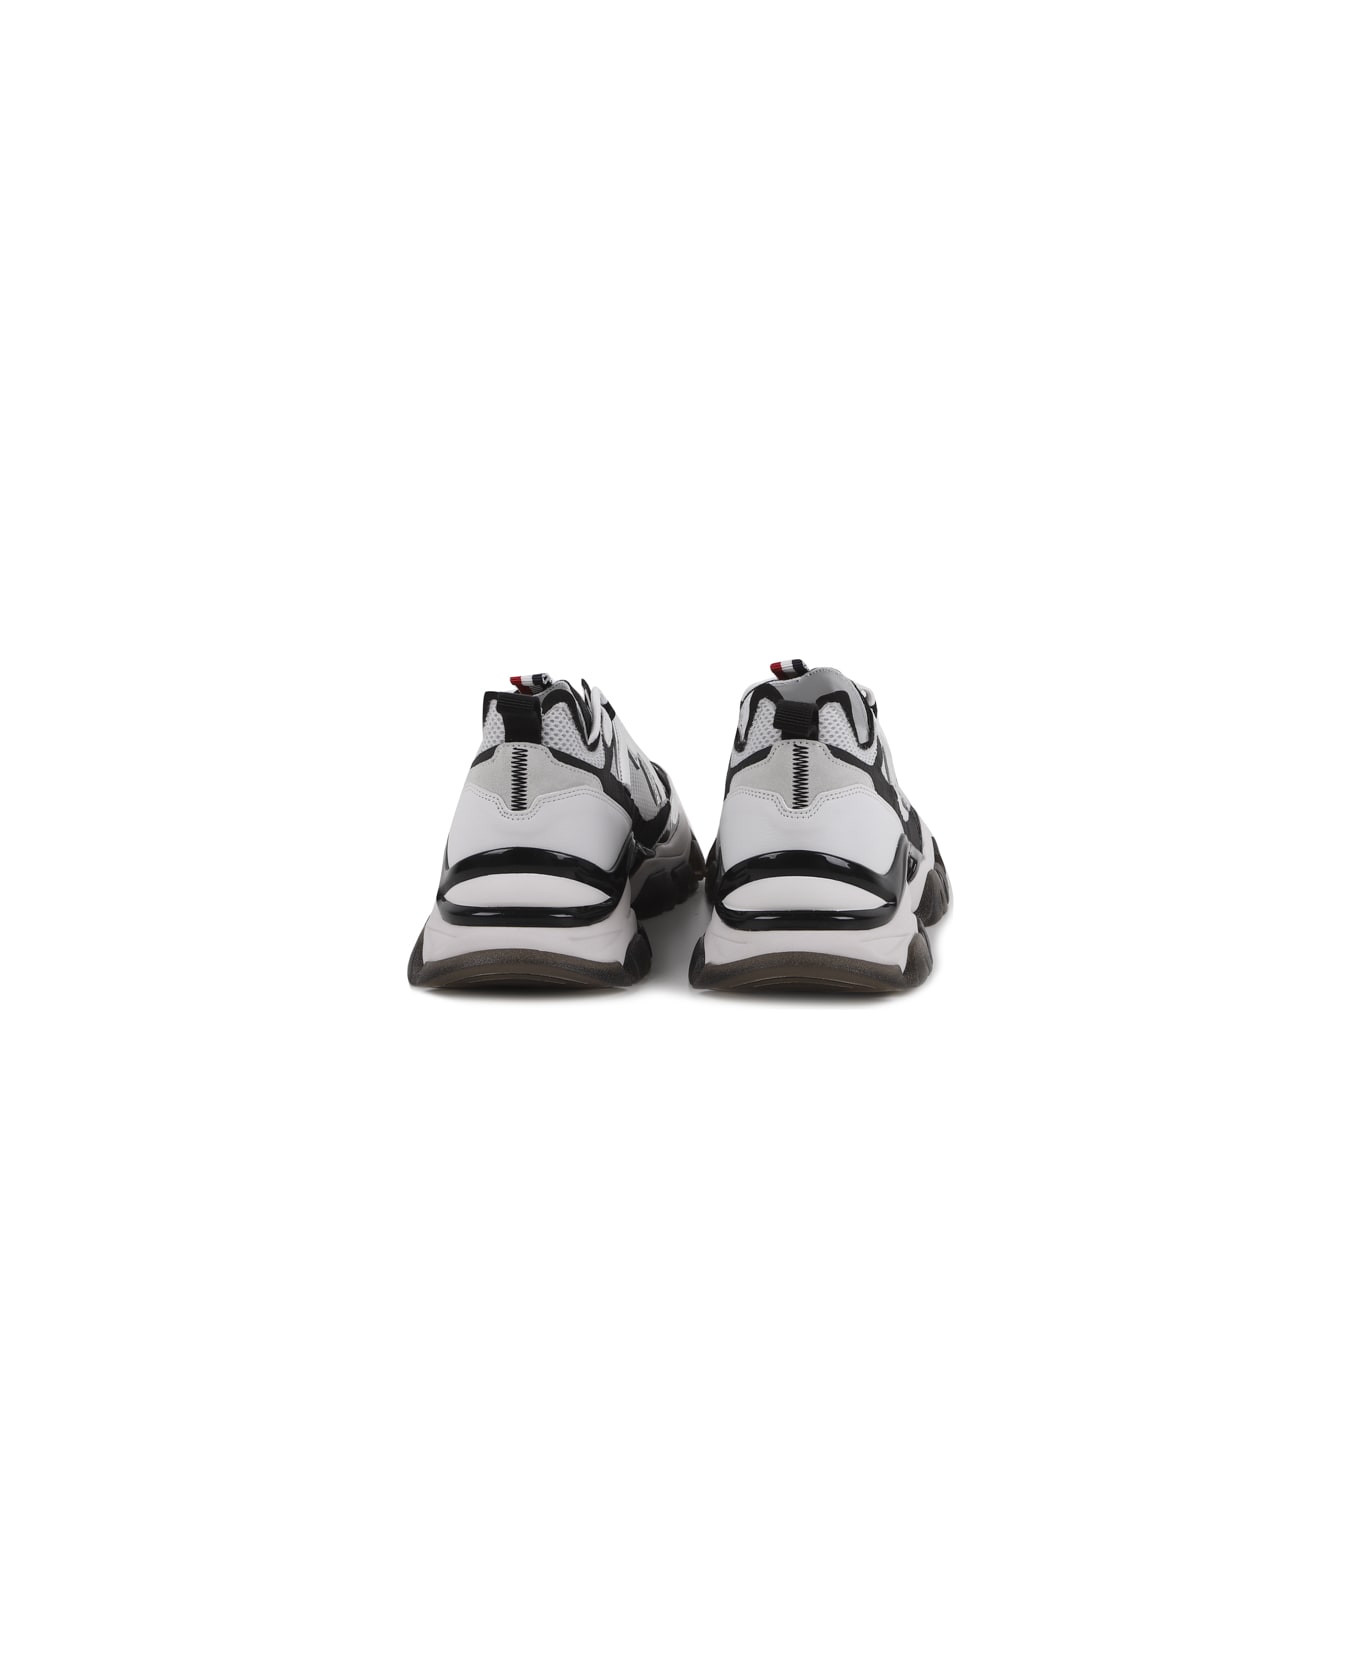 Moncler Leave No Trace Sneakers - White, black スニーカー